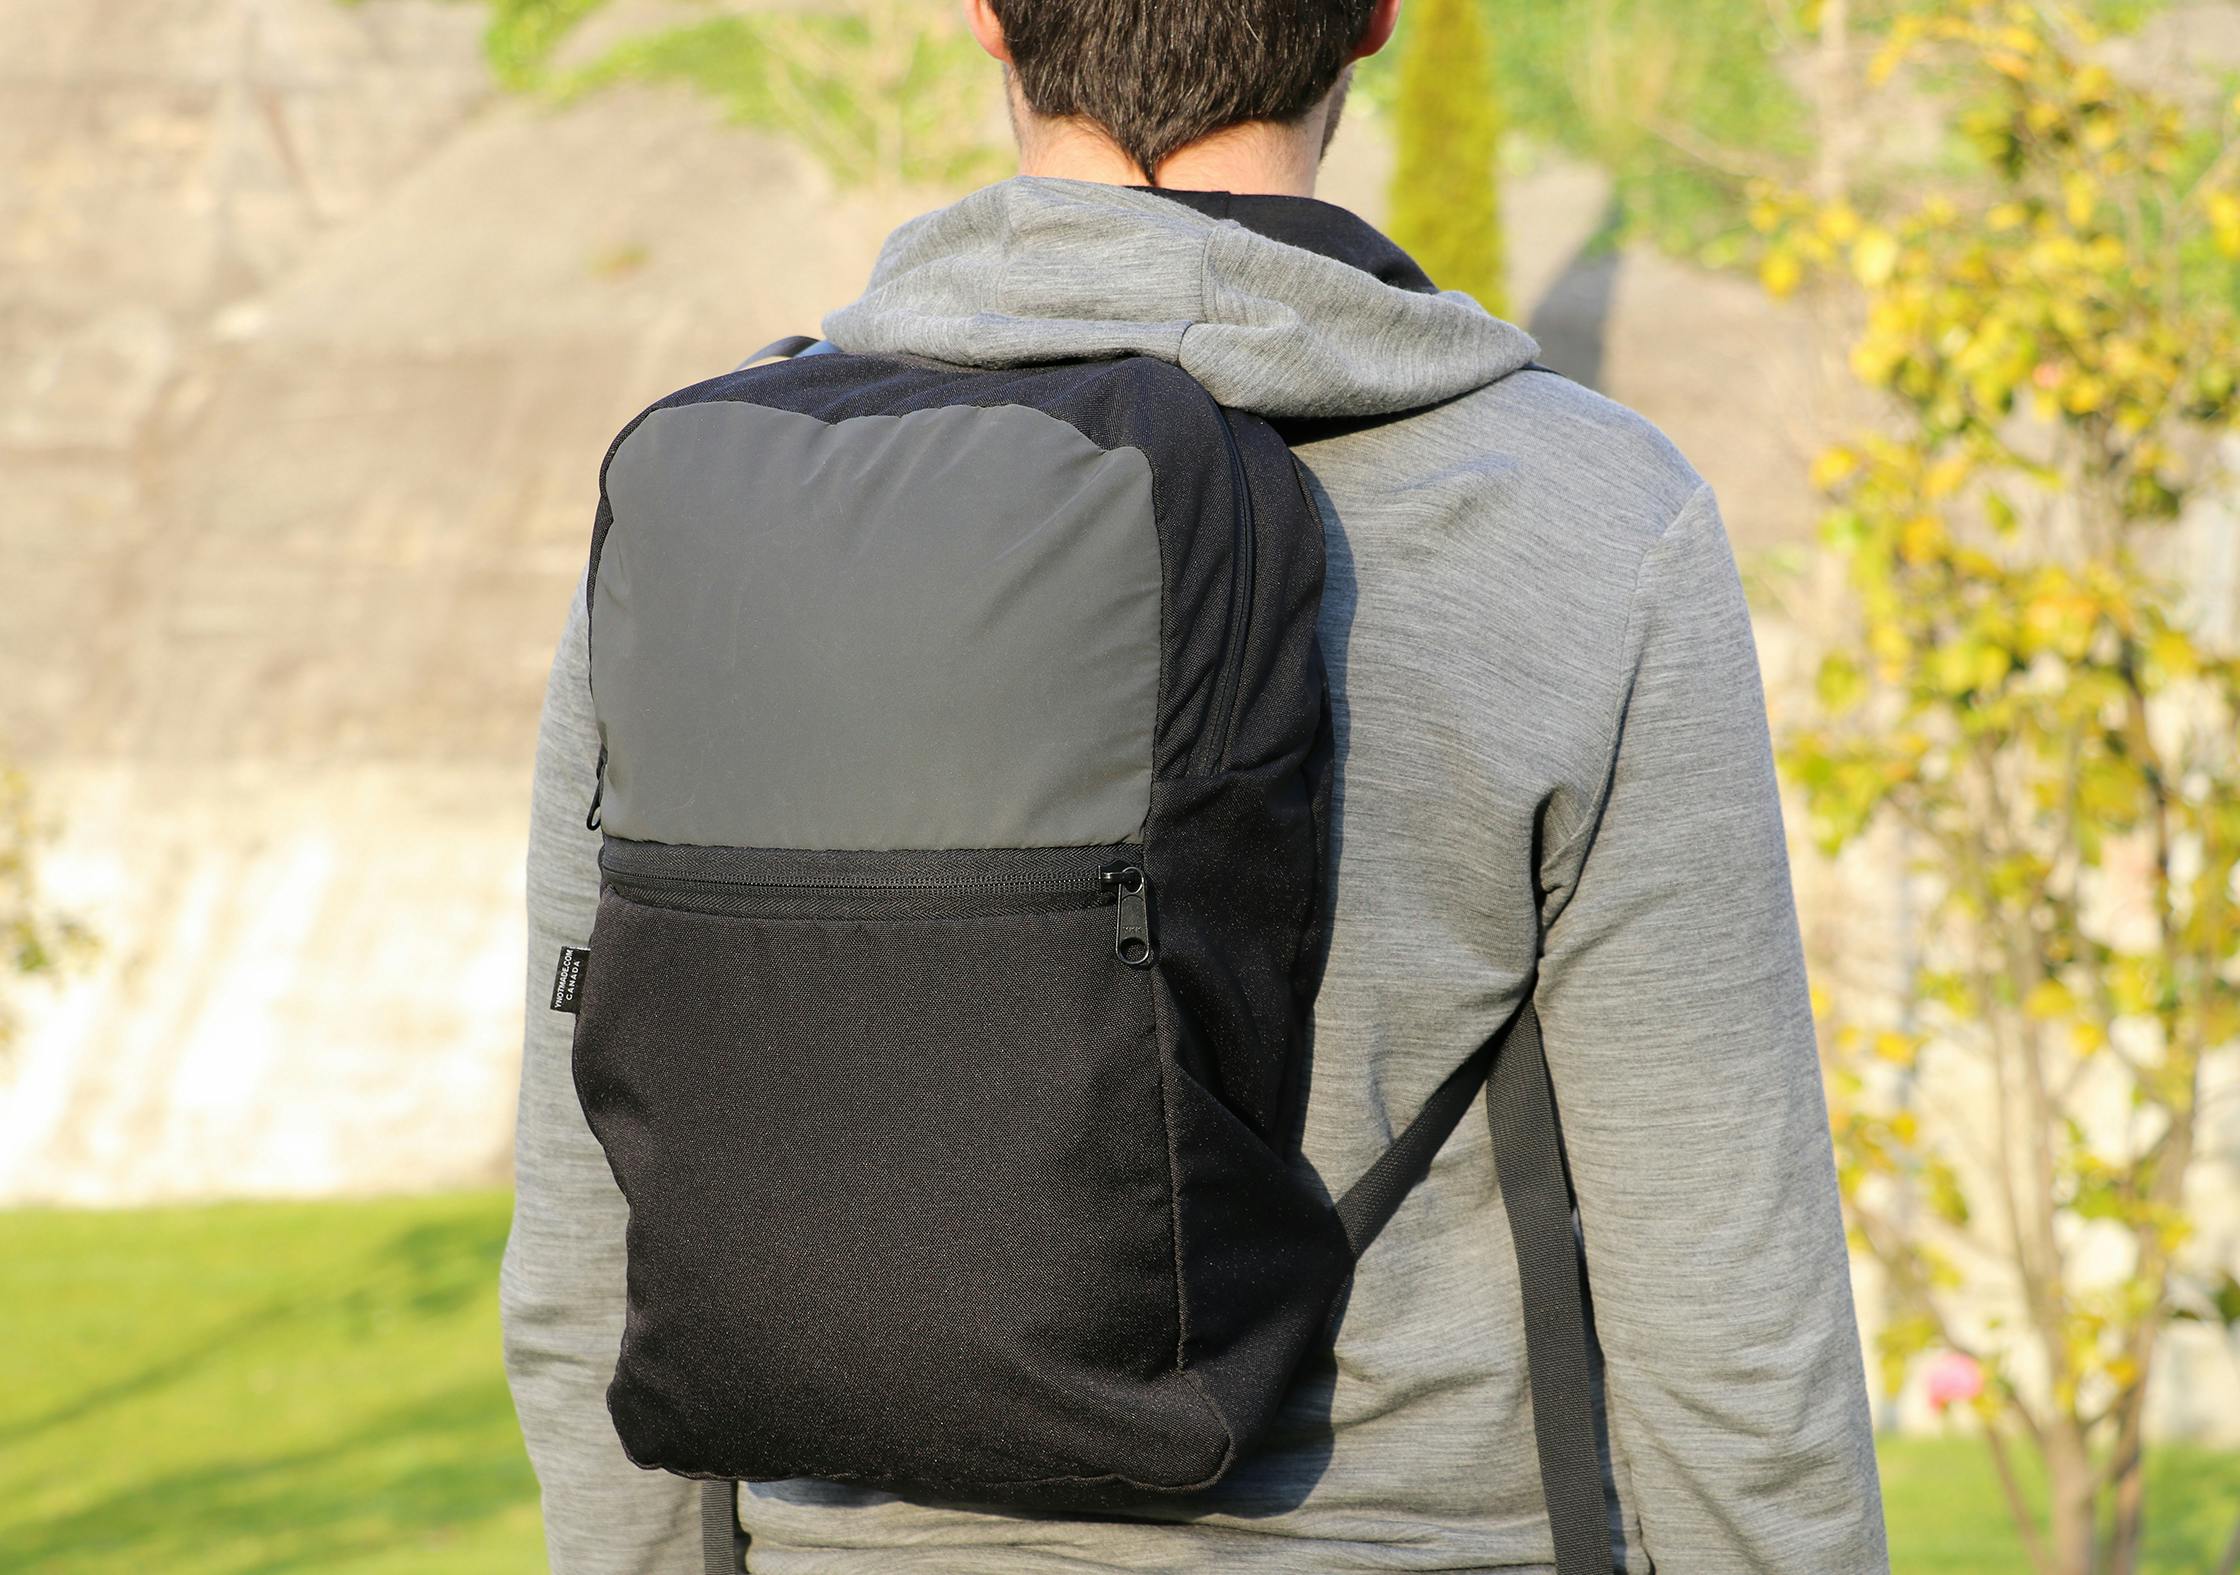 YNOT Deploy Packable Daypack Review | Pack Hacker